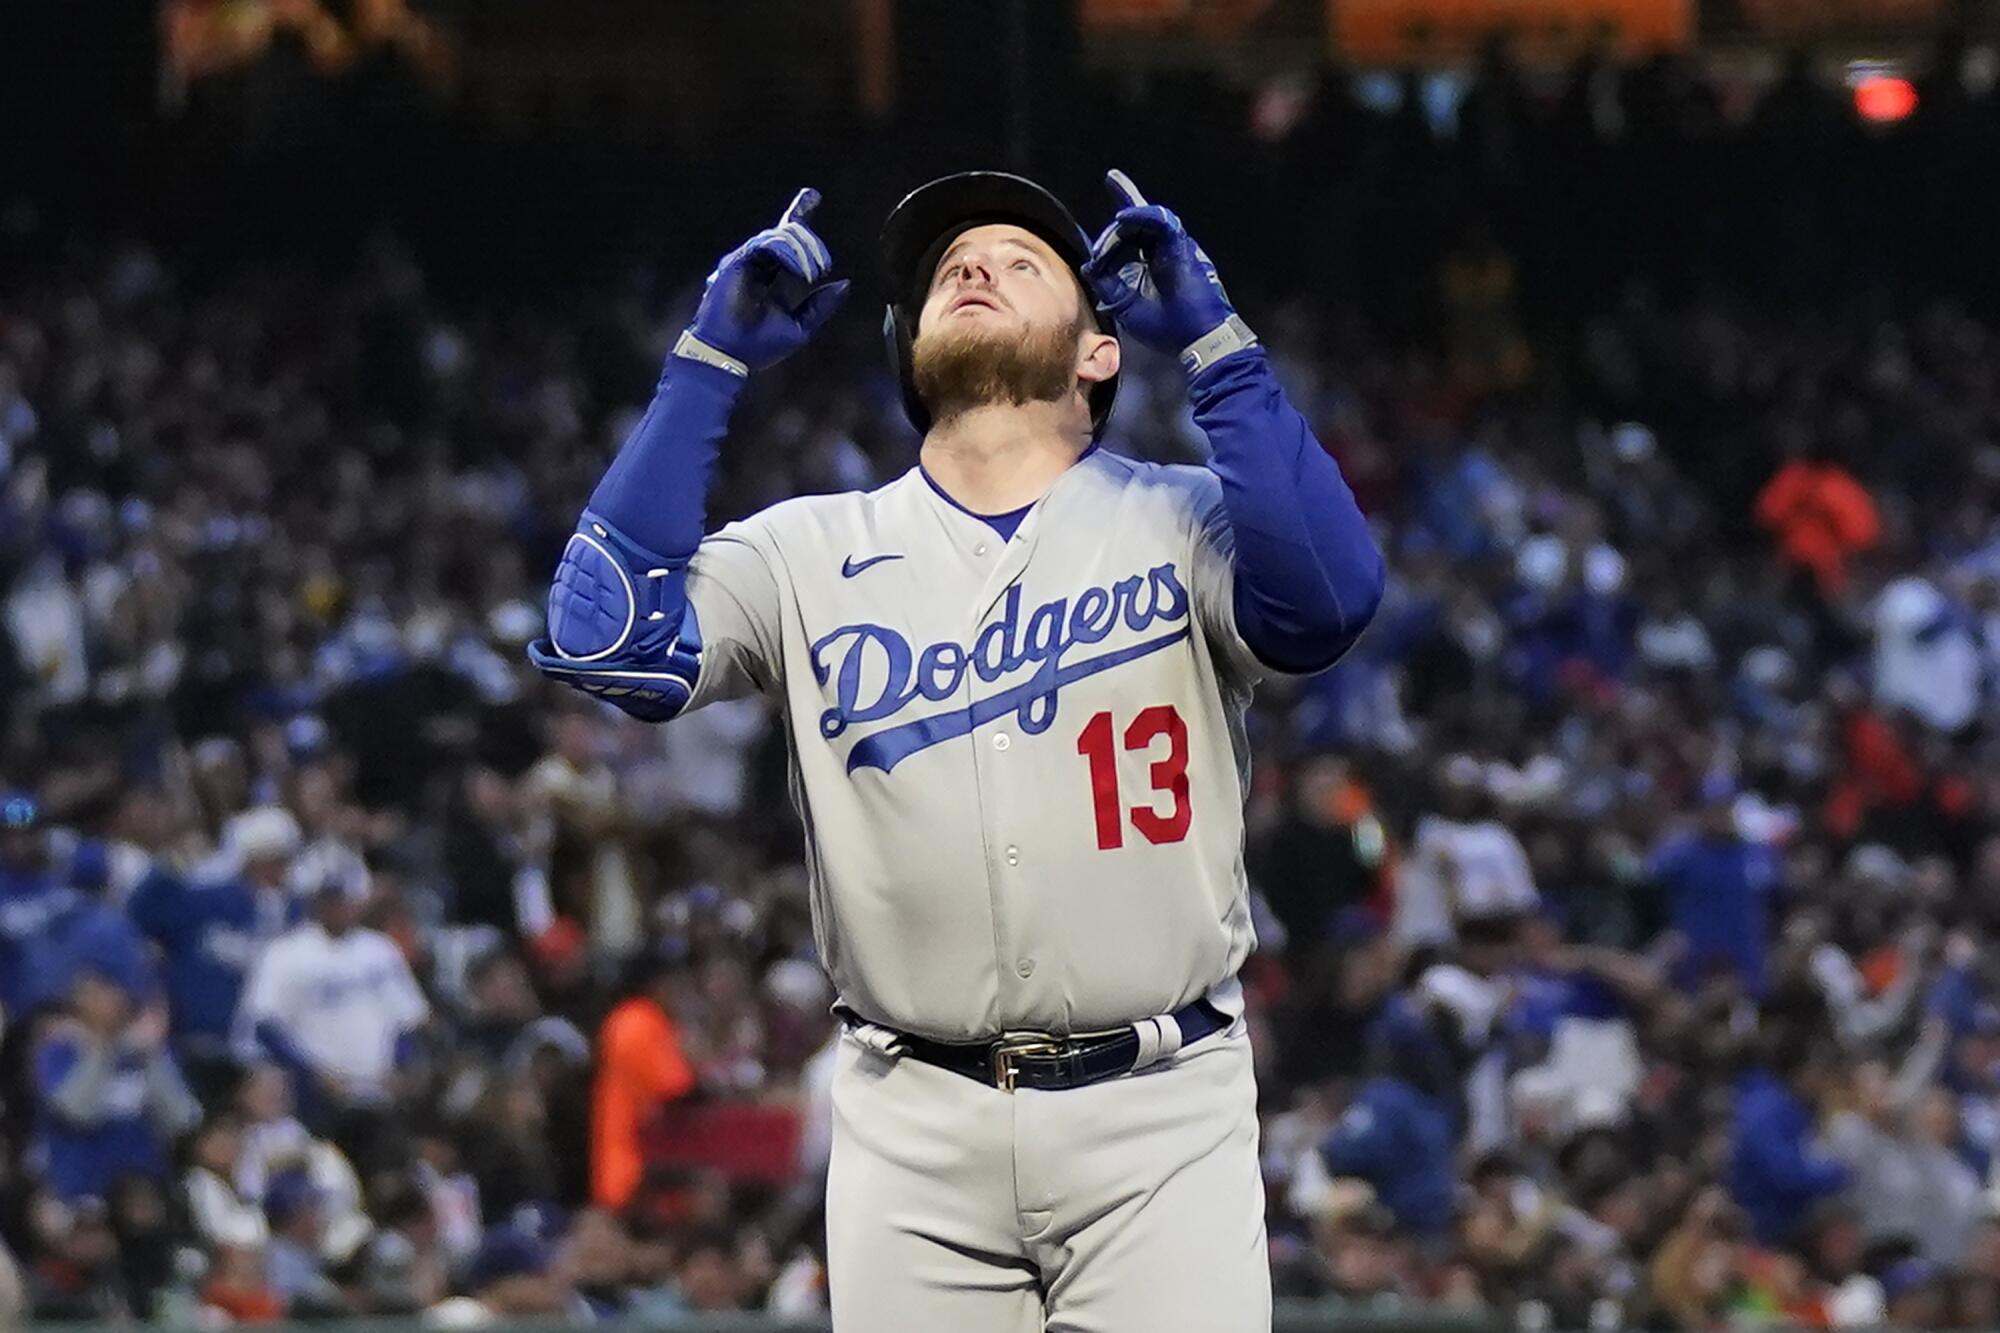 Max Muncy gestures after hitting a three-run home run in the third inning.